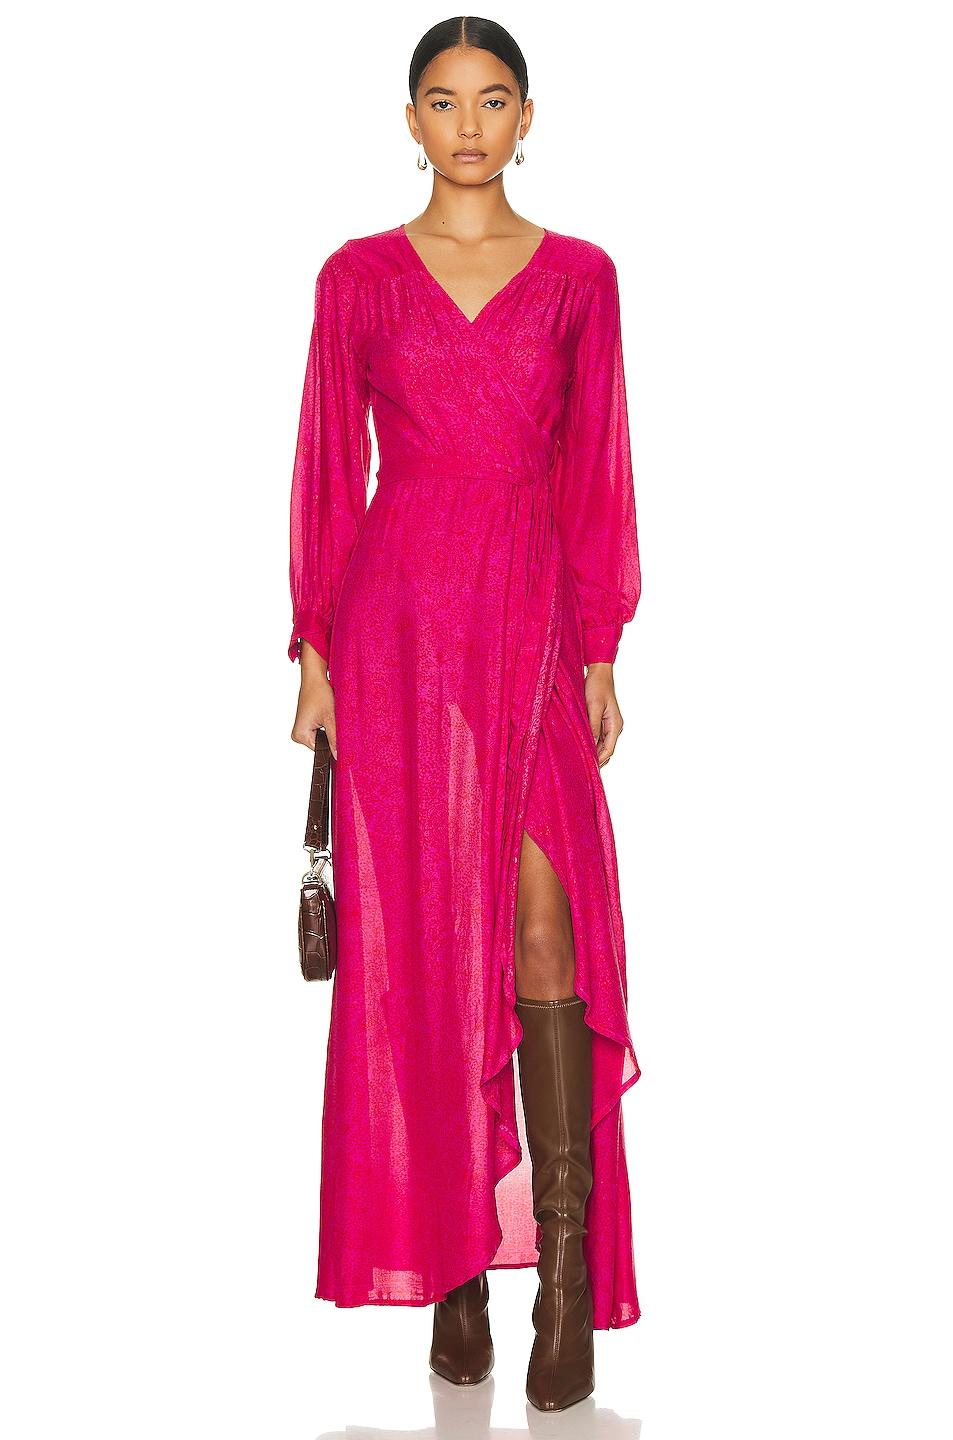 Natalie Martin Kate Long Sleeve Maxi Dress in Pink | Lyst